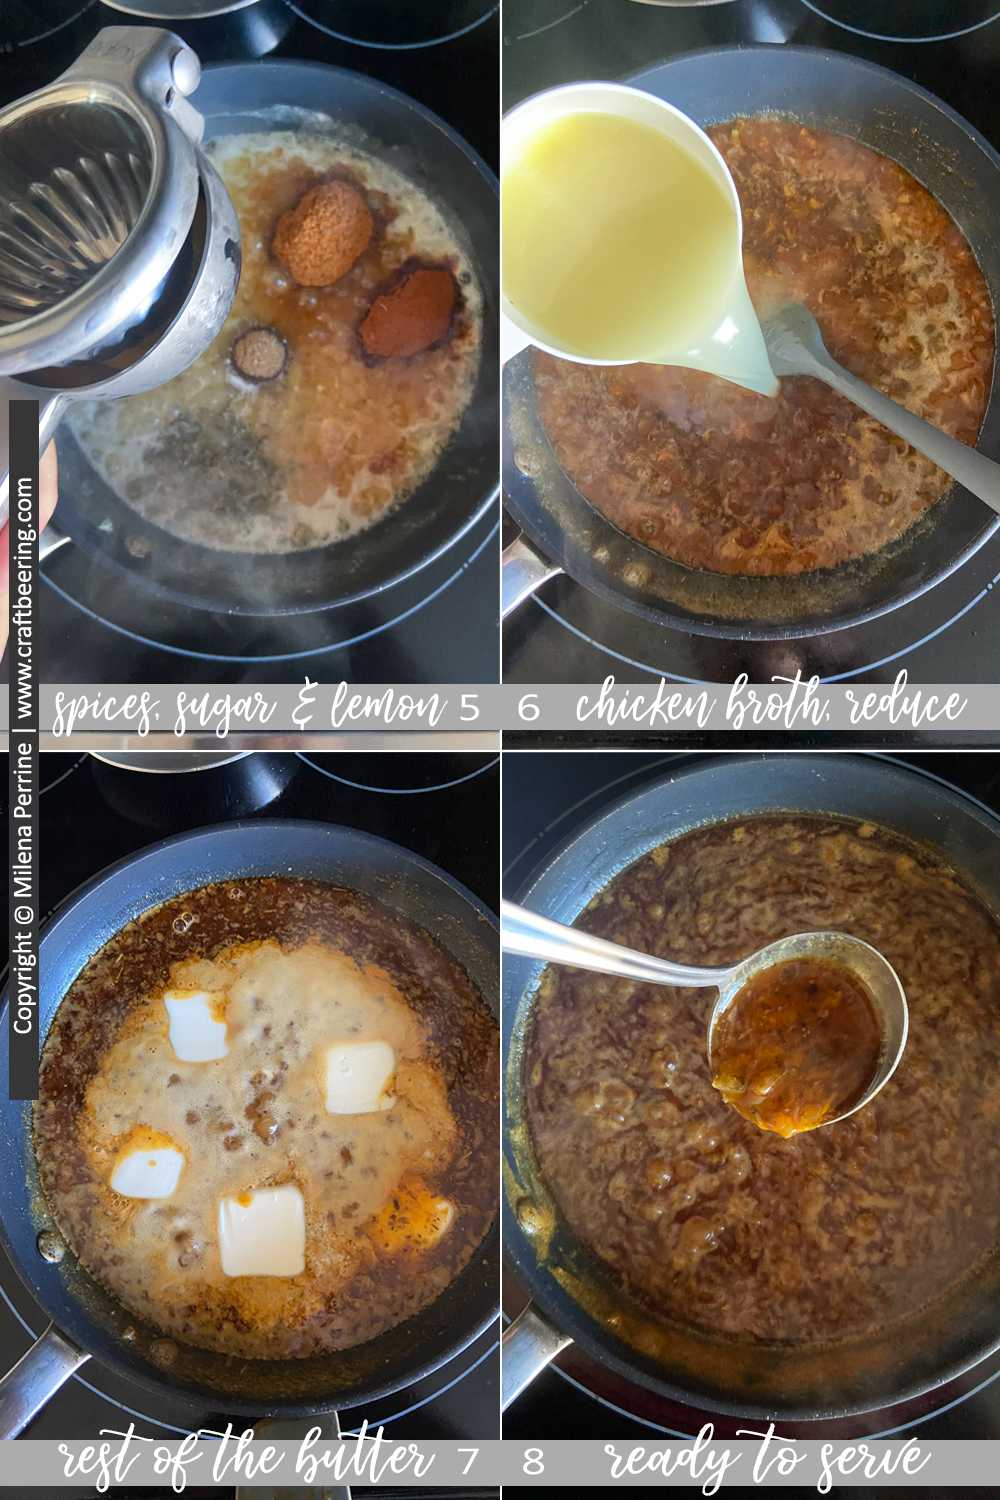 How to make cajun butter sauce for seafood boil (part 2 of step-by-step)